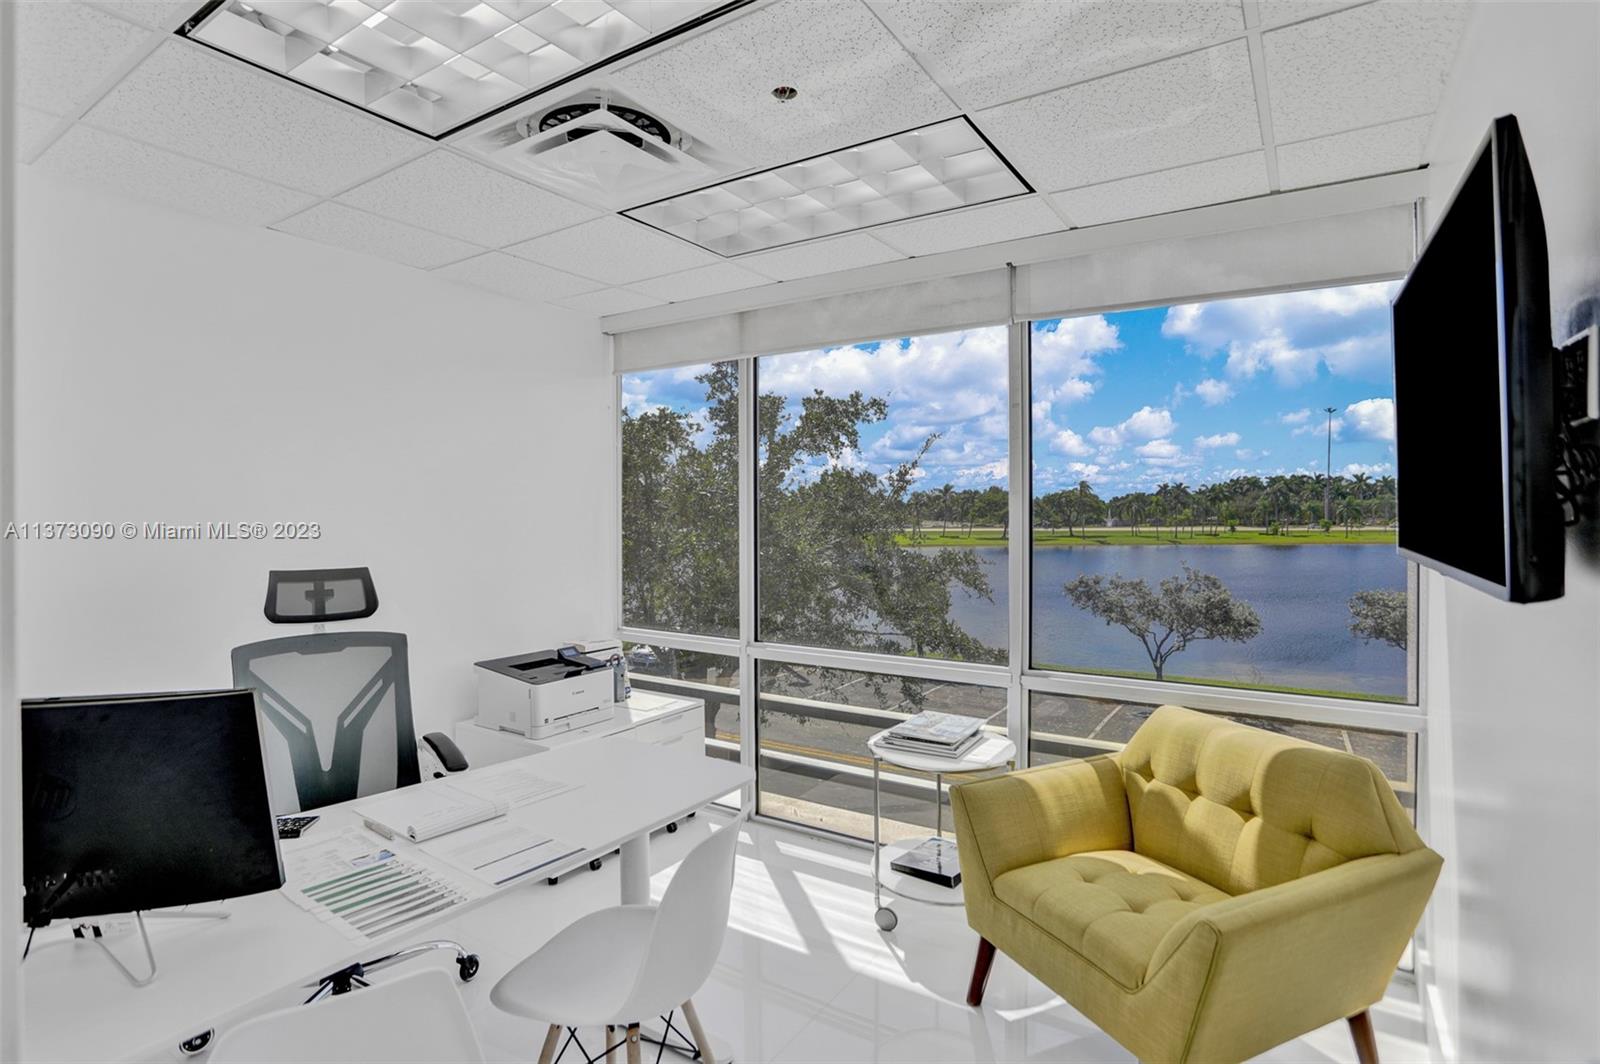 18501  Pines Blvd #201 For Sale A11373090, FL